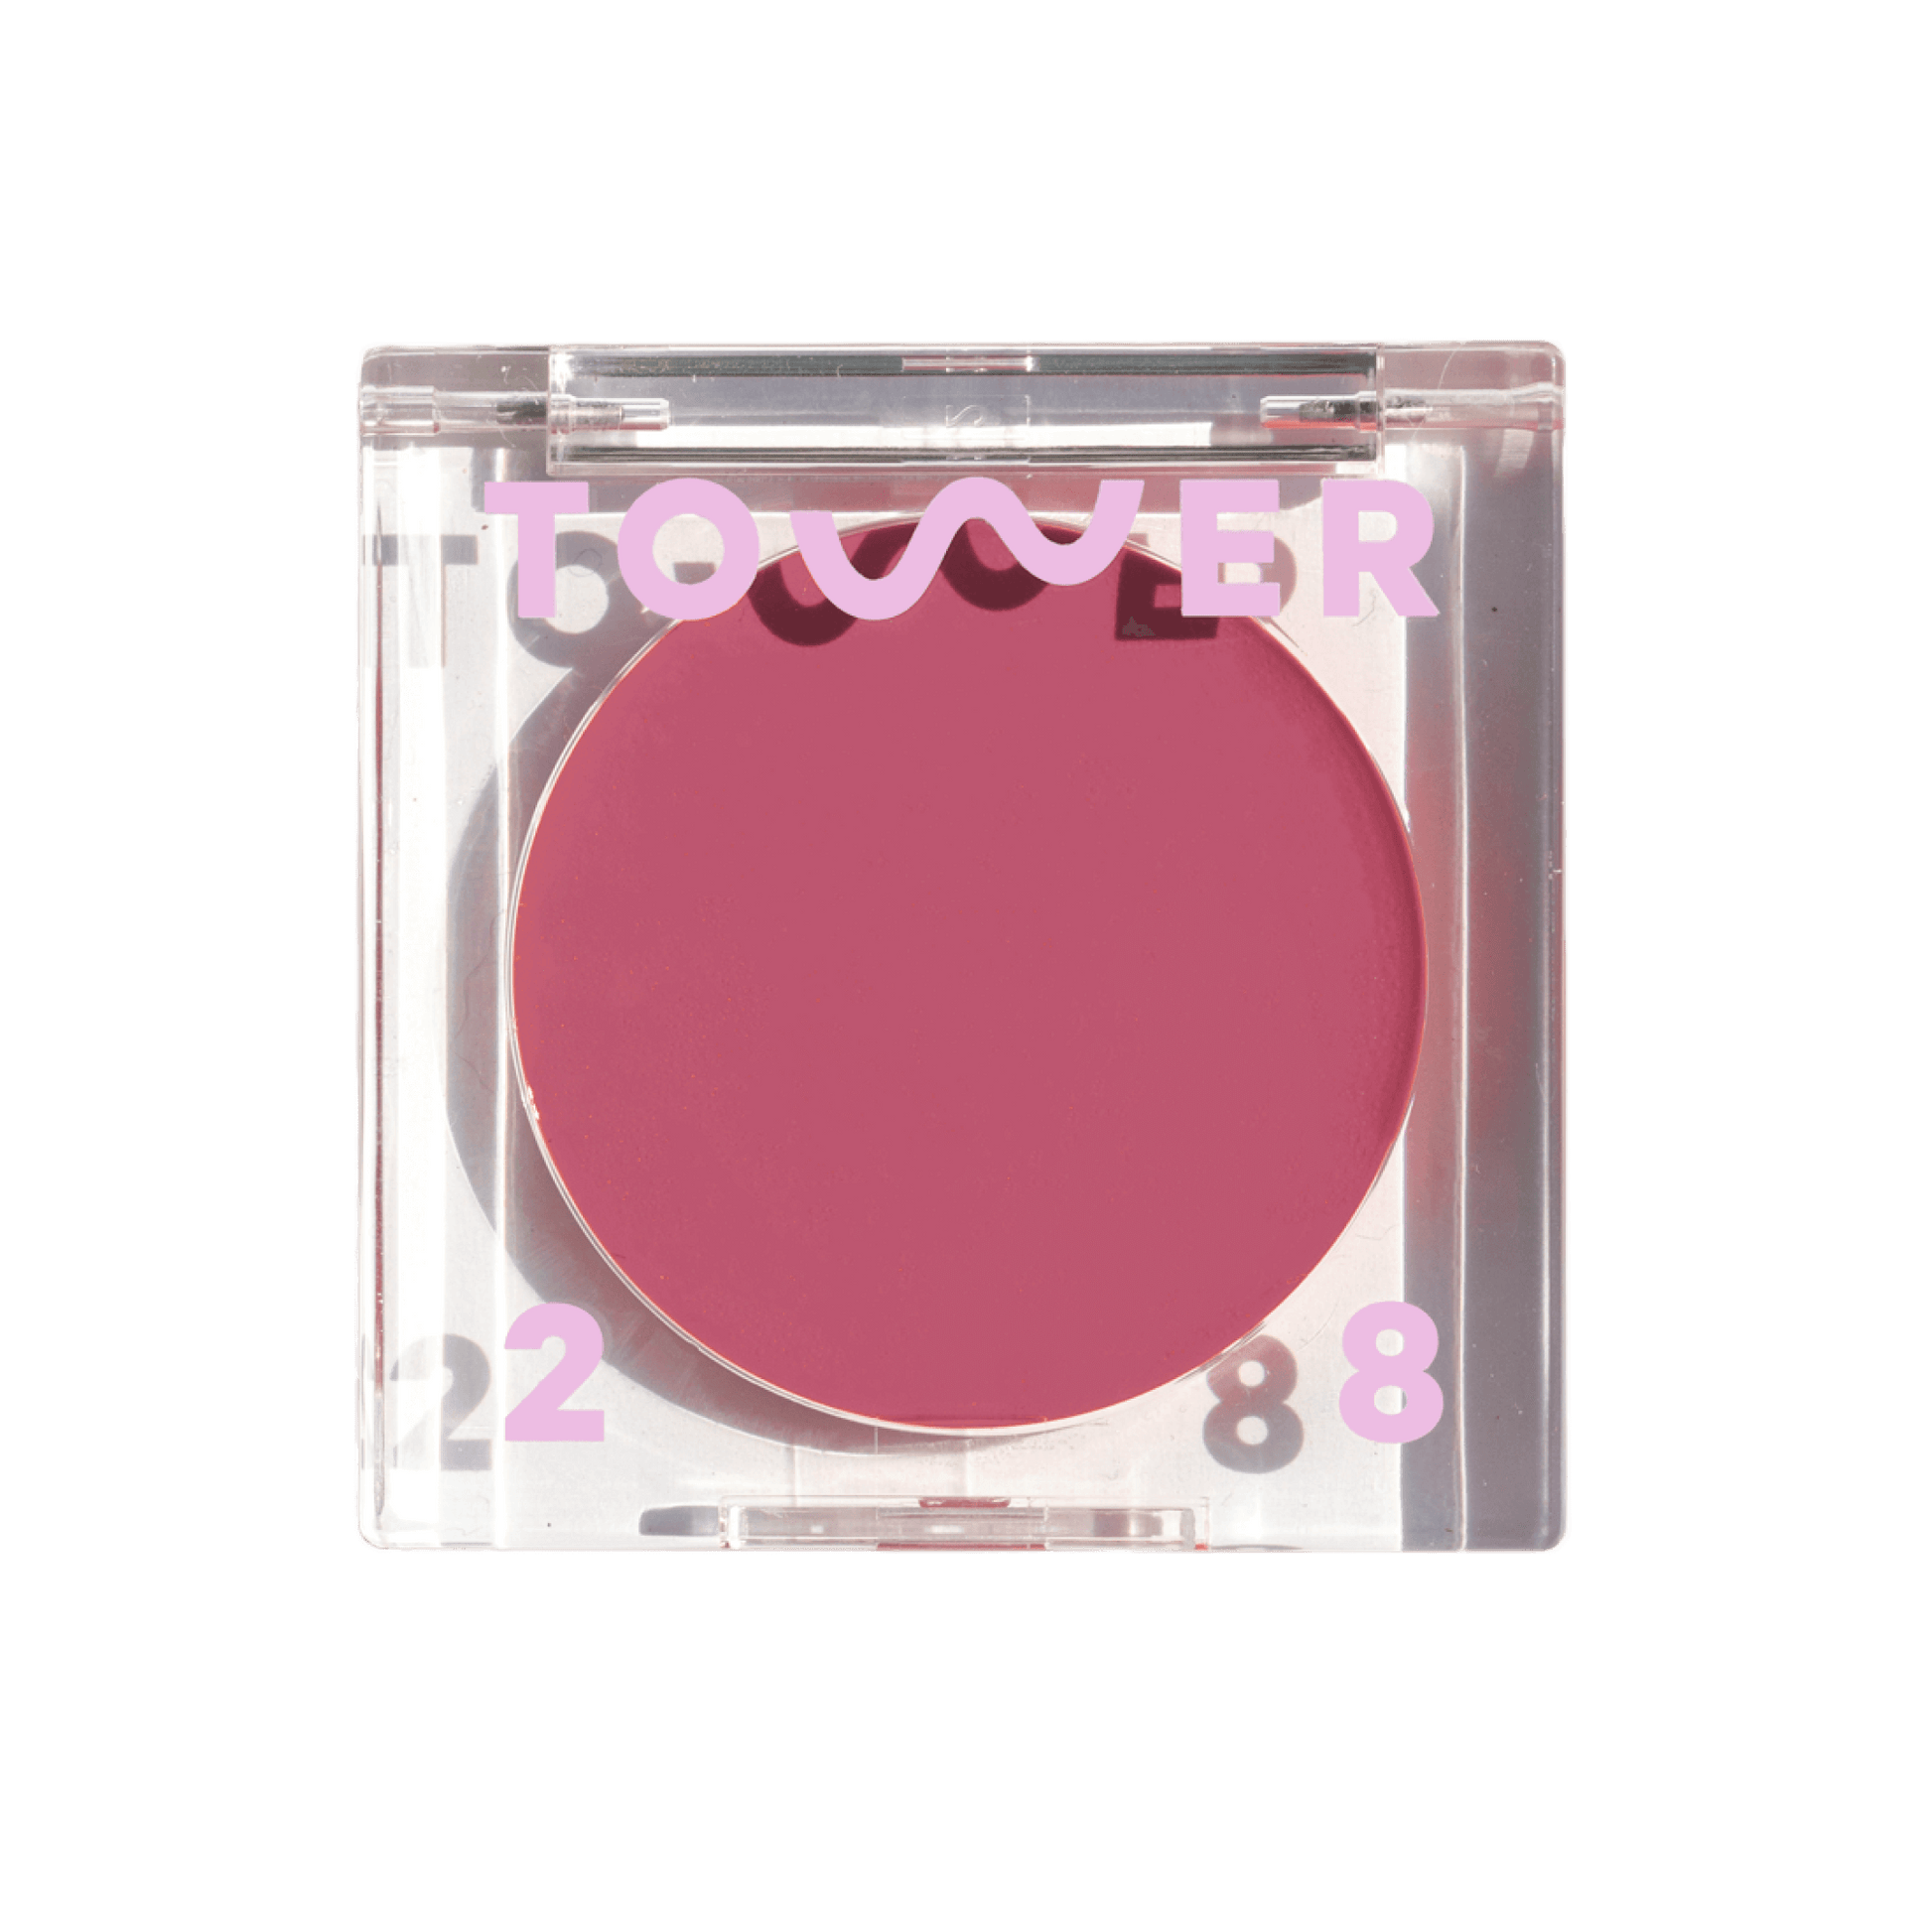 Tower 28 Beauty's BeachPlease Cream Blush in the shade After Hours